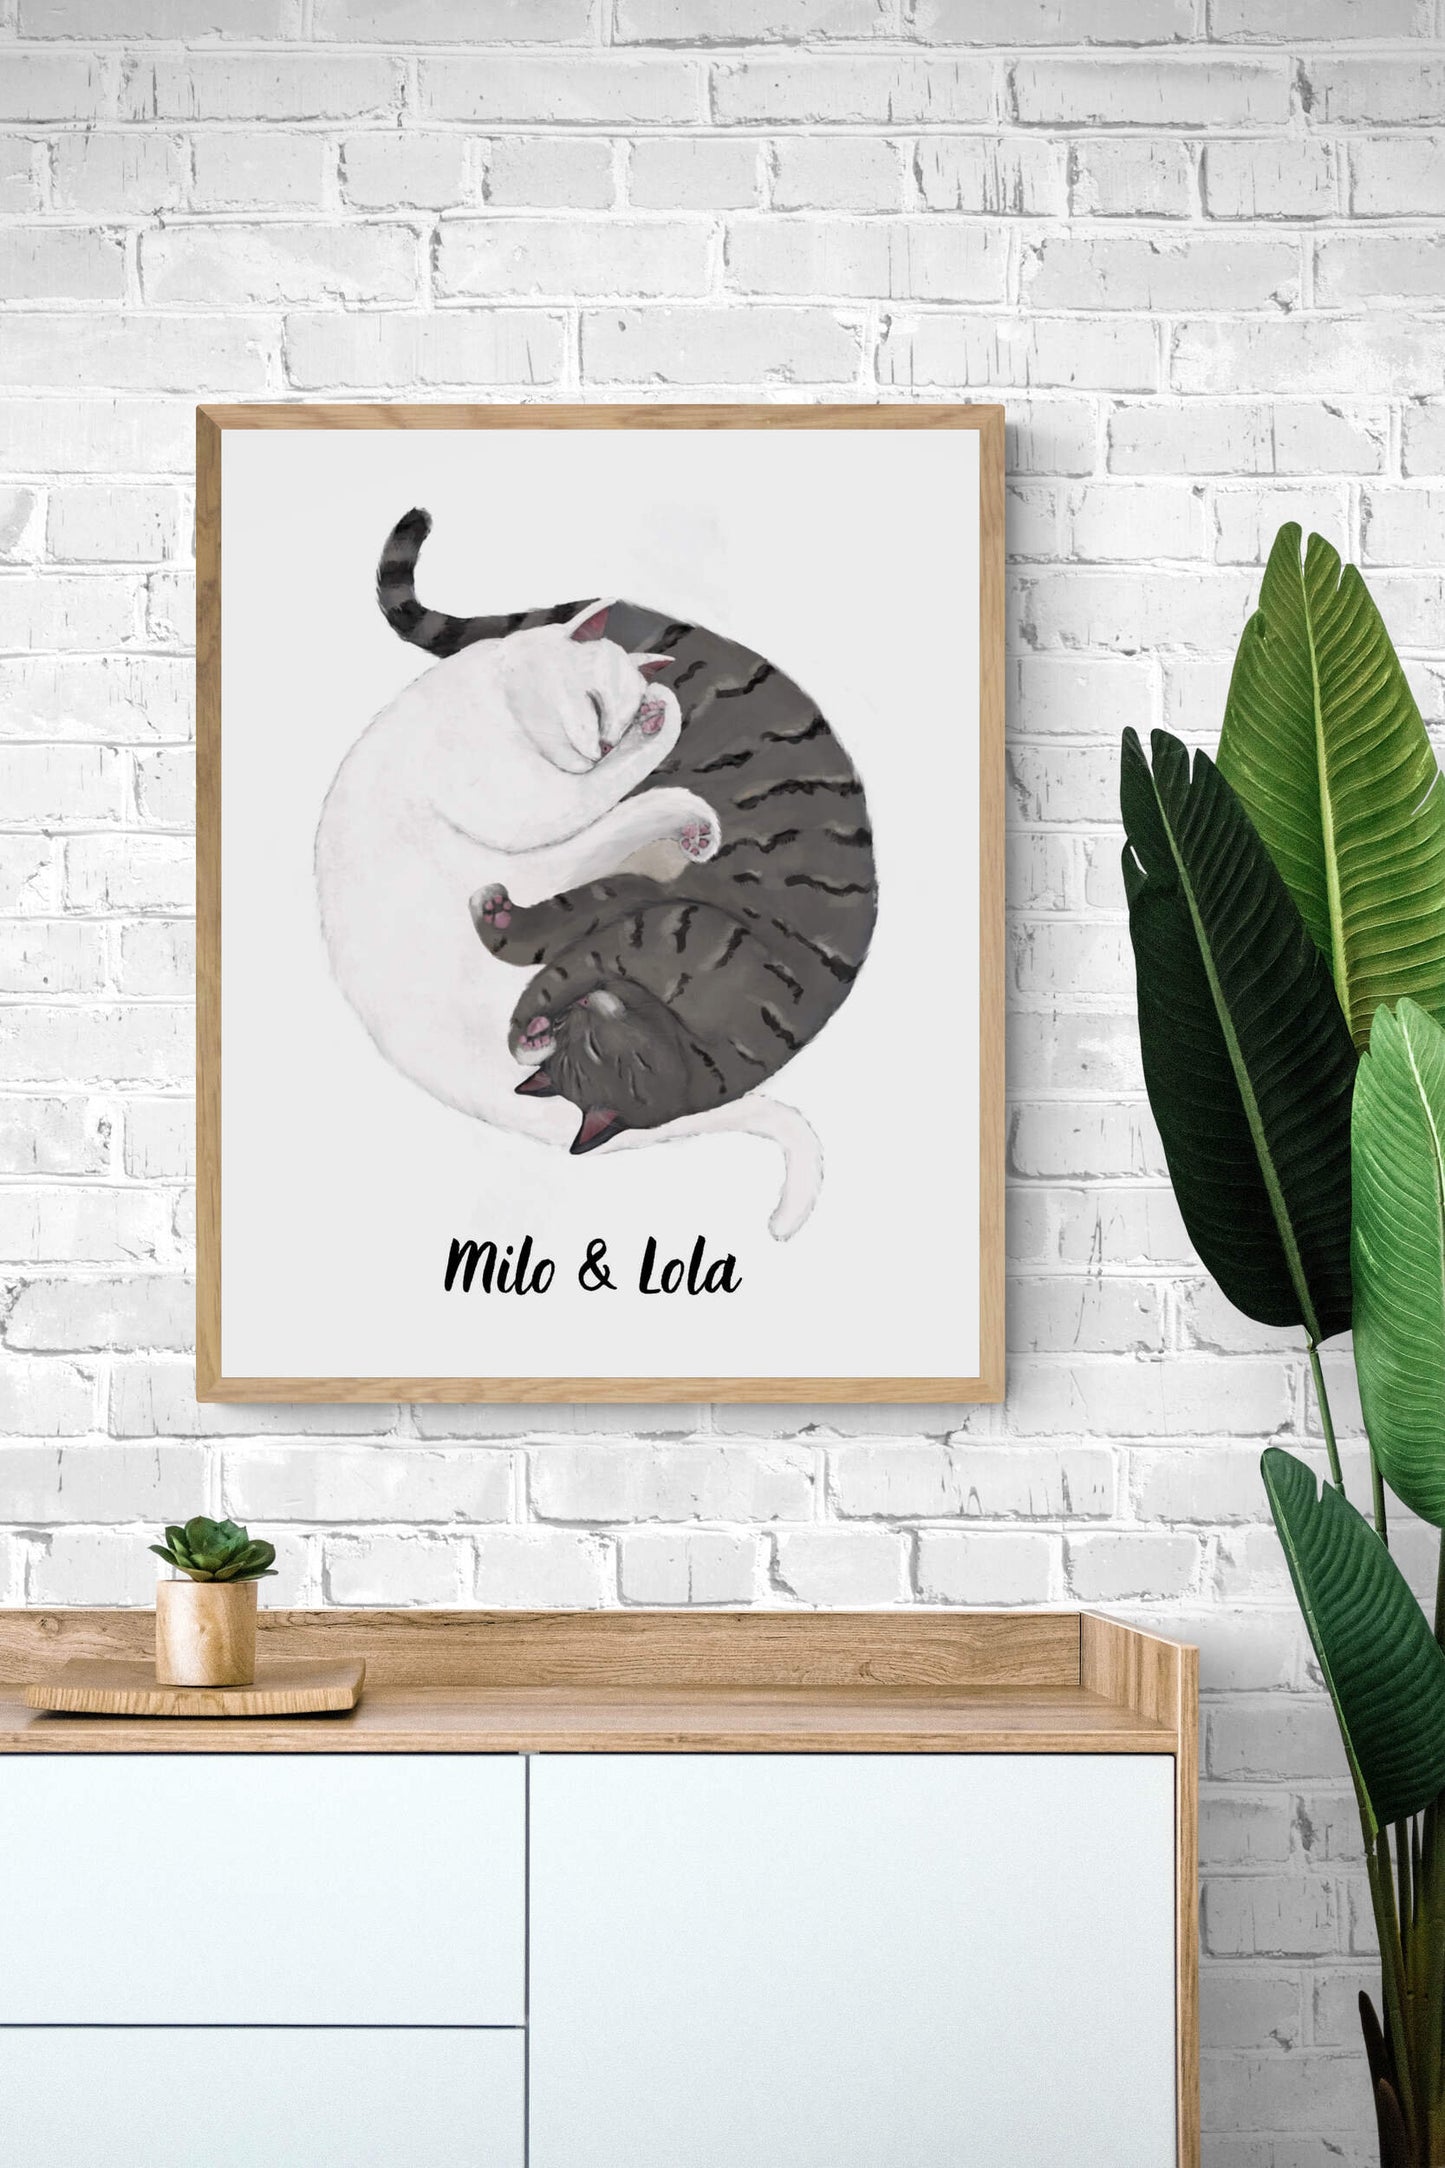 Customized Sleeping White And  Gray Tabby Cat Print, Custom Cuddling Gray and White Cat, Cat Illustration, Home Decor, Lazy Cat Painting